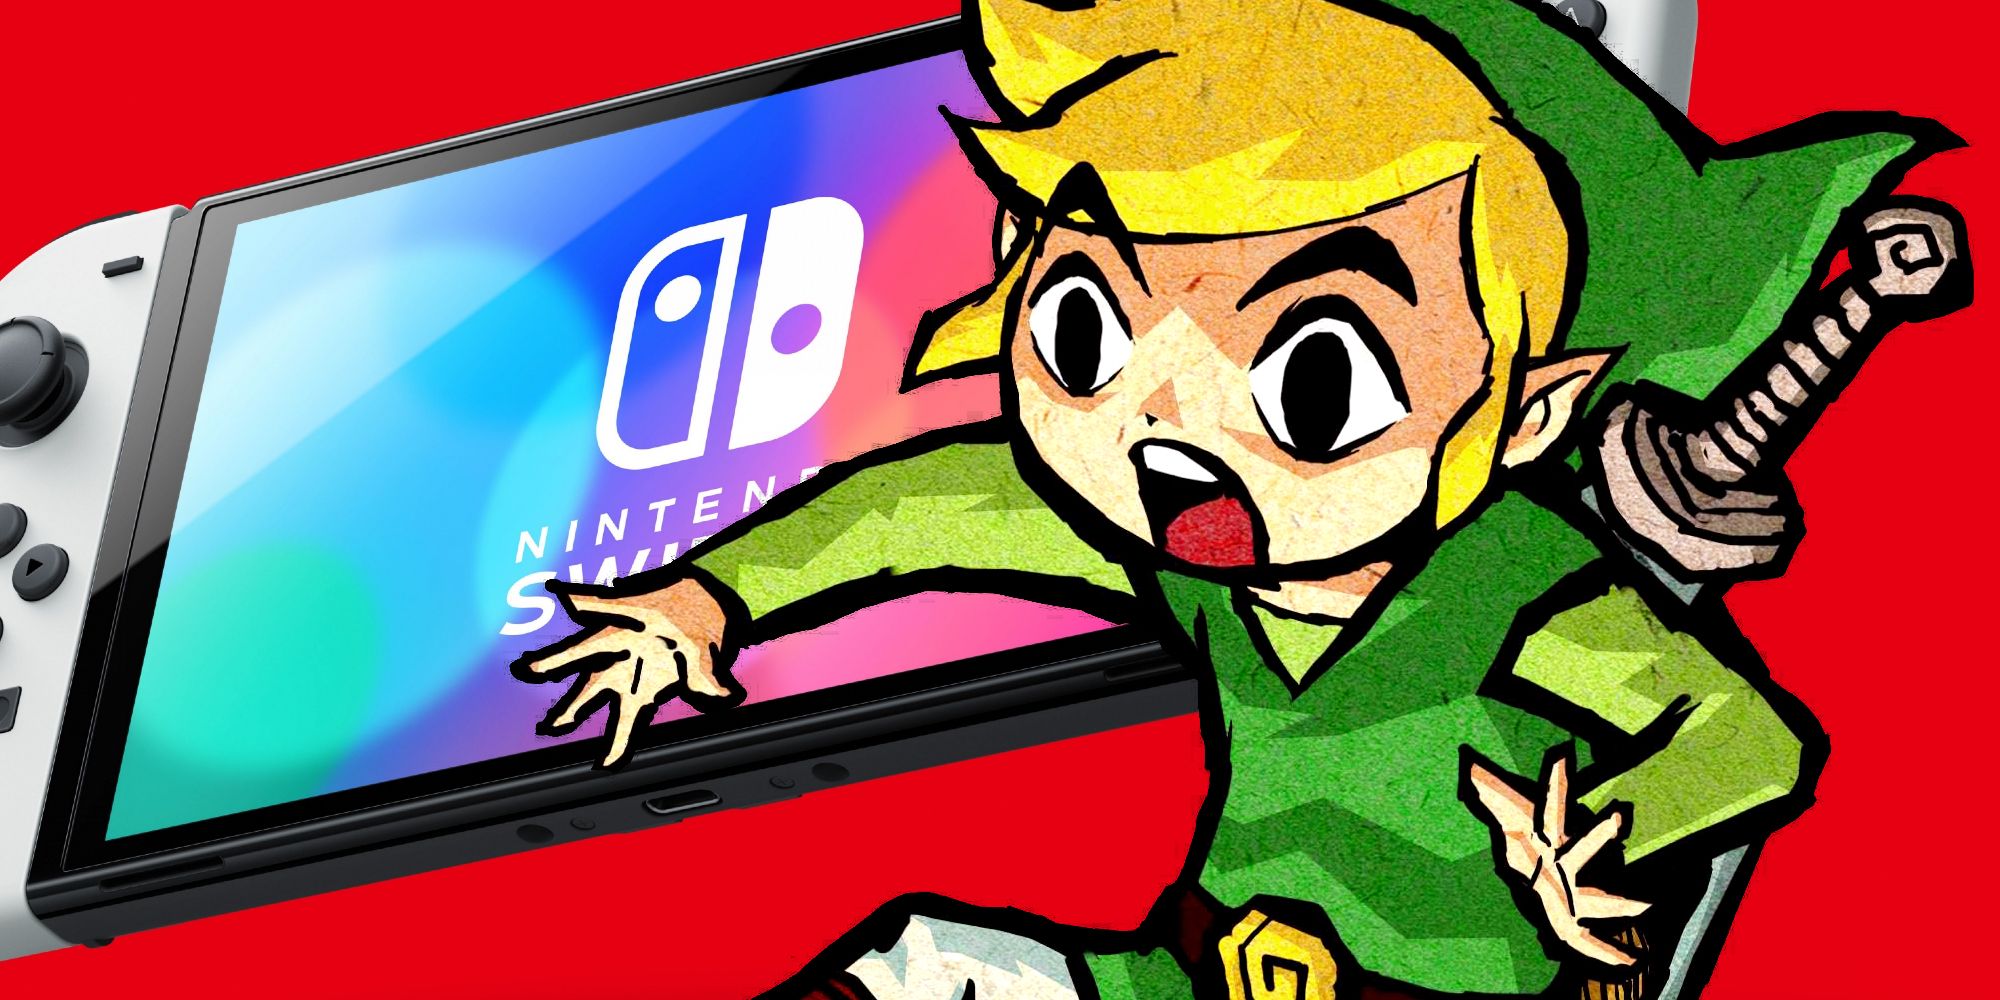 Link from The Legend of Zelda: The Wind Waker looking shocked in front of a Nintendo Switch in the background.